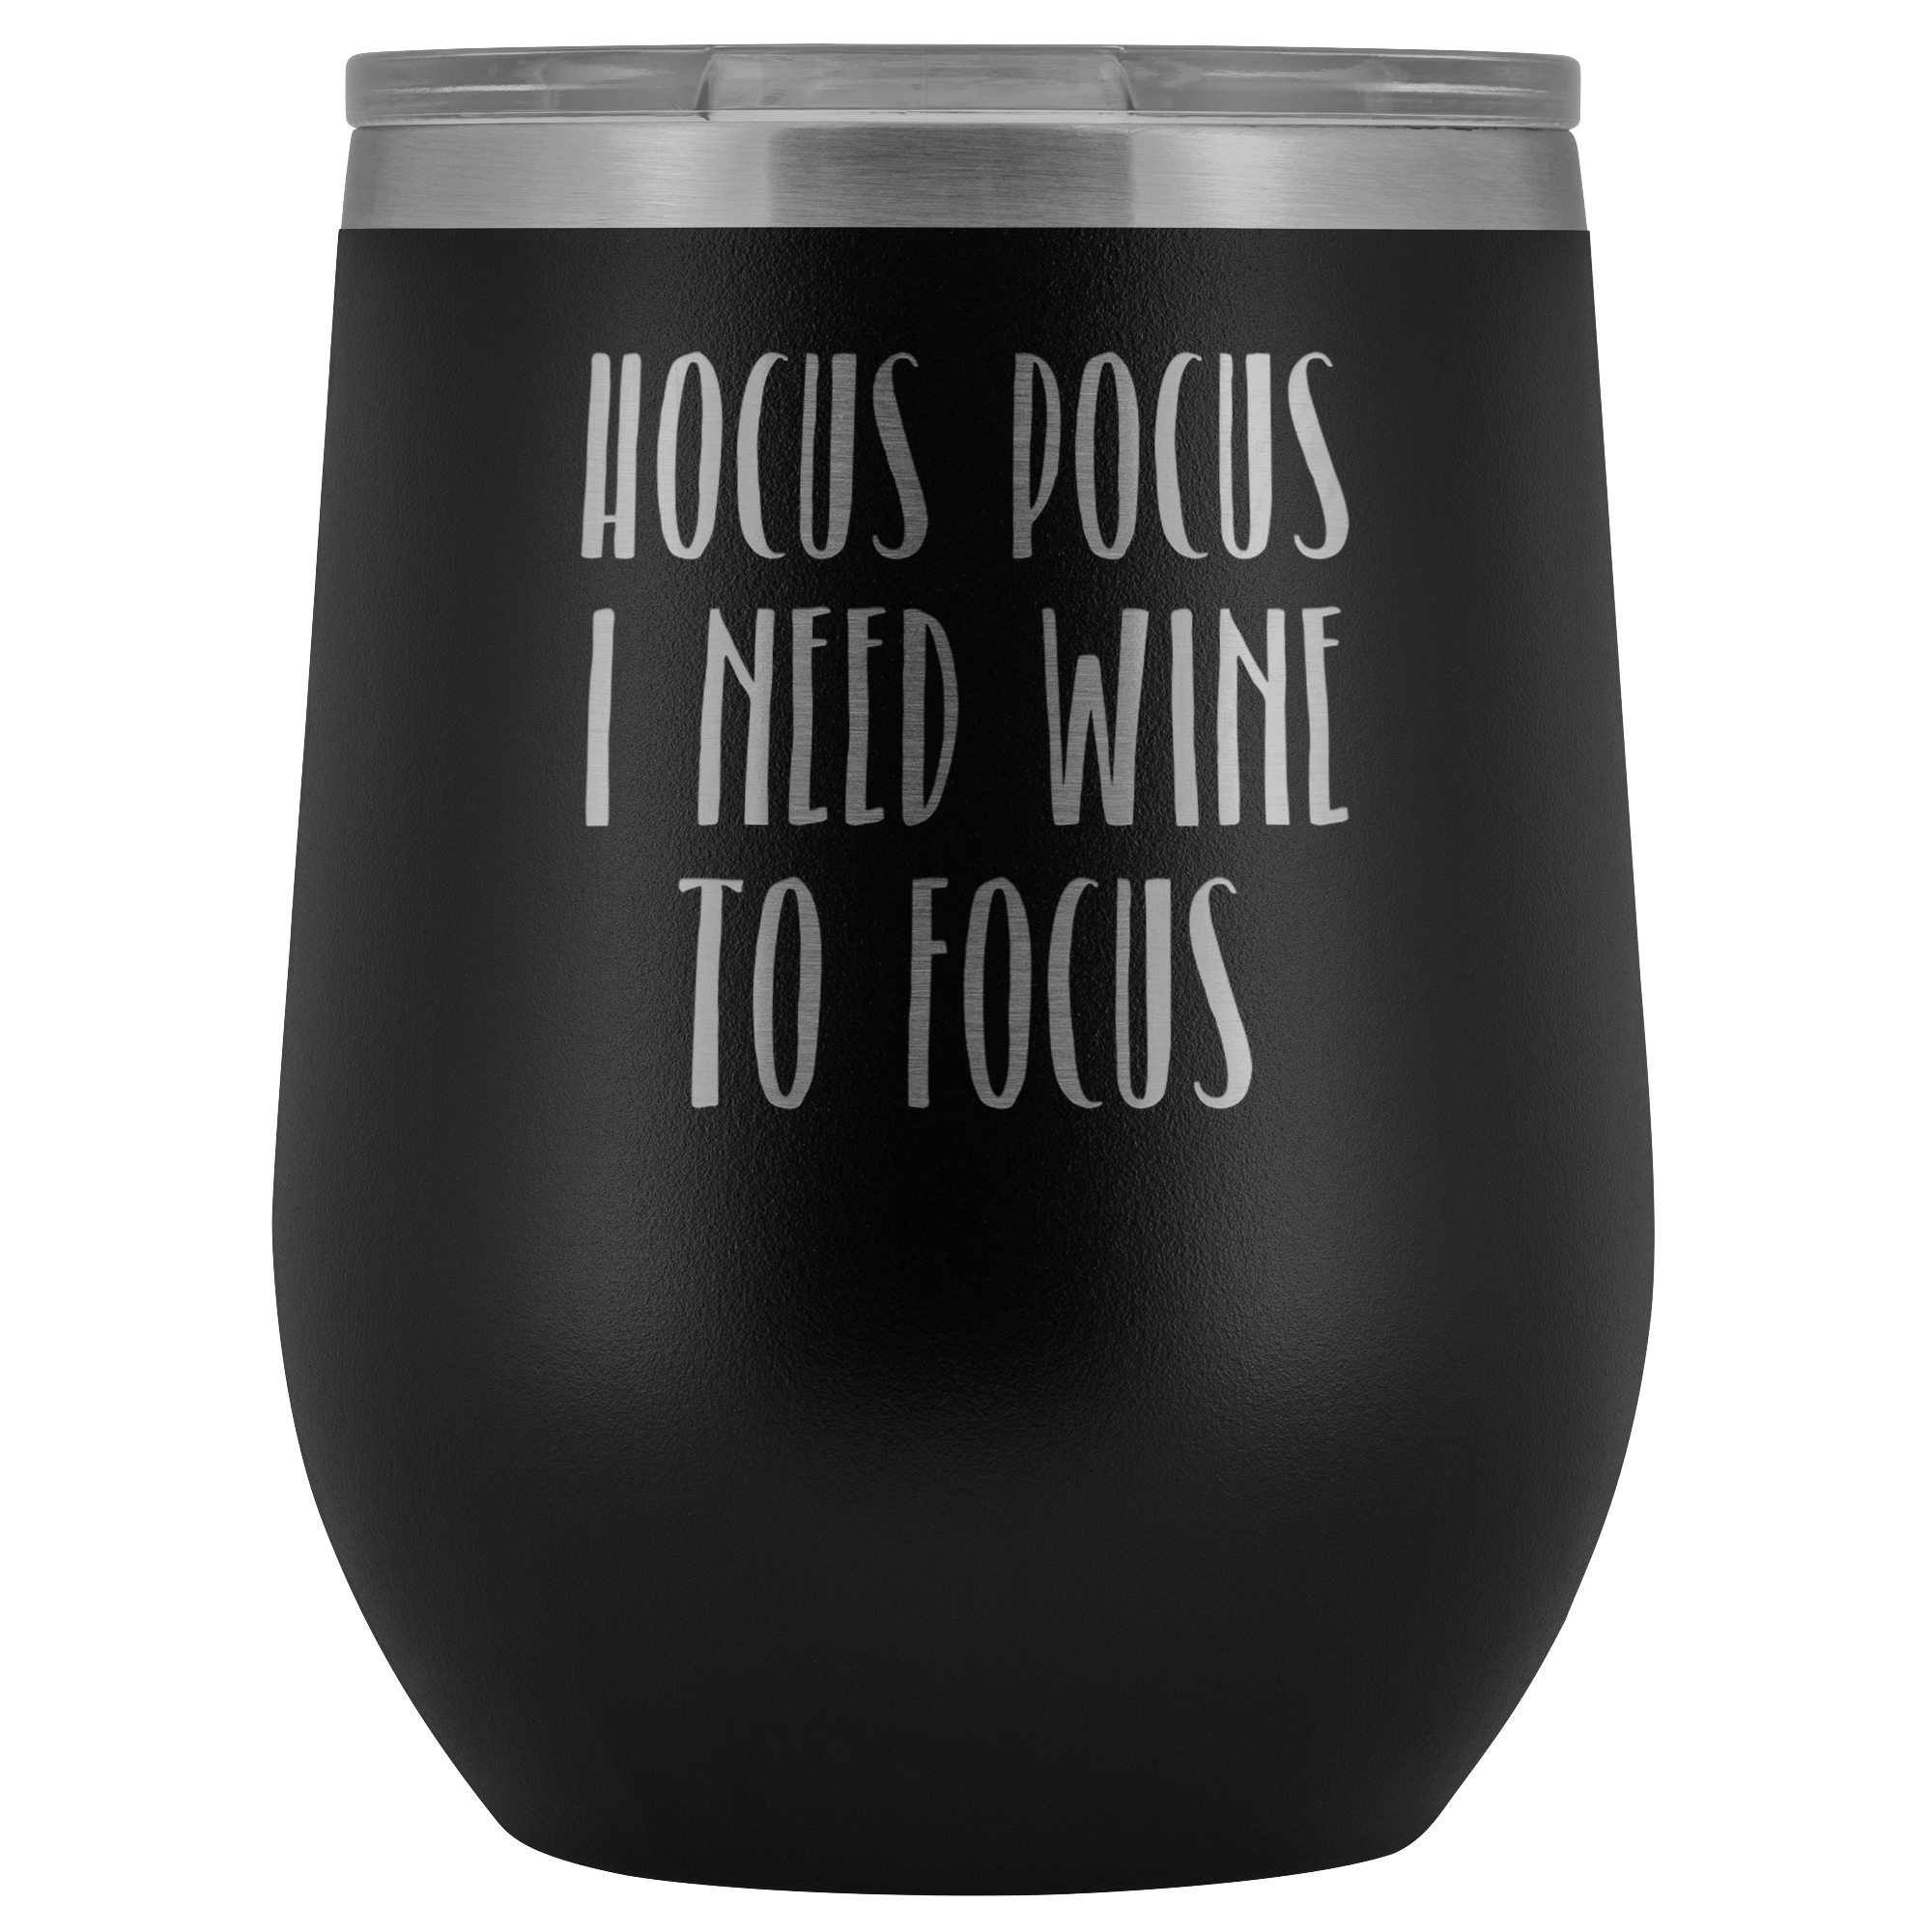 Hocus Pocus I Need Wine to Focus Halloween Wine Tumbler Funny Fall Gifts Insulated BPA Free 12oz Travel Sippy Cup